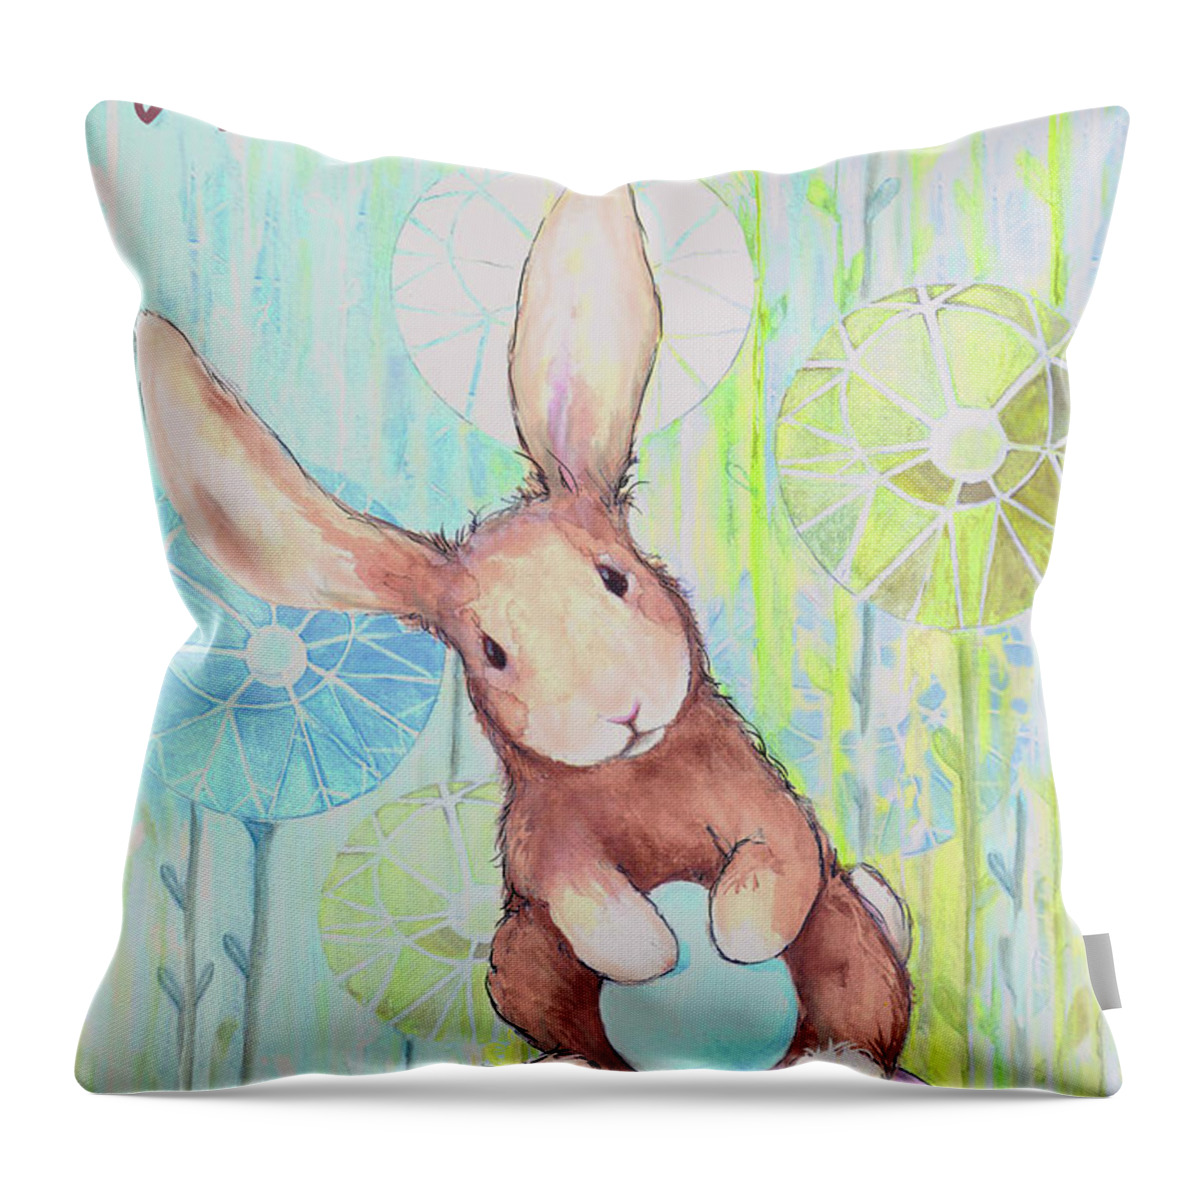 Happy Throw Pillow featuring the mixed media Happy Easter Bunny IIi by Diannart